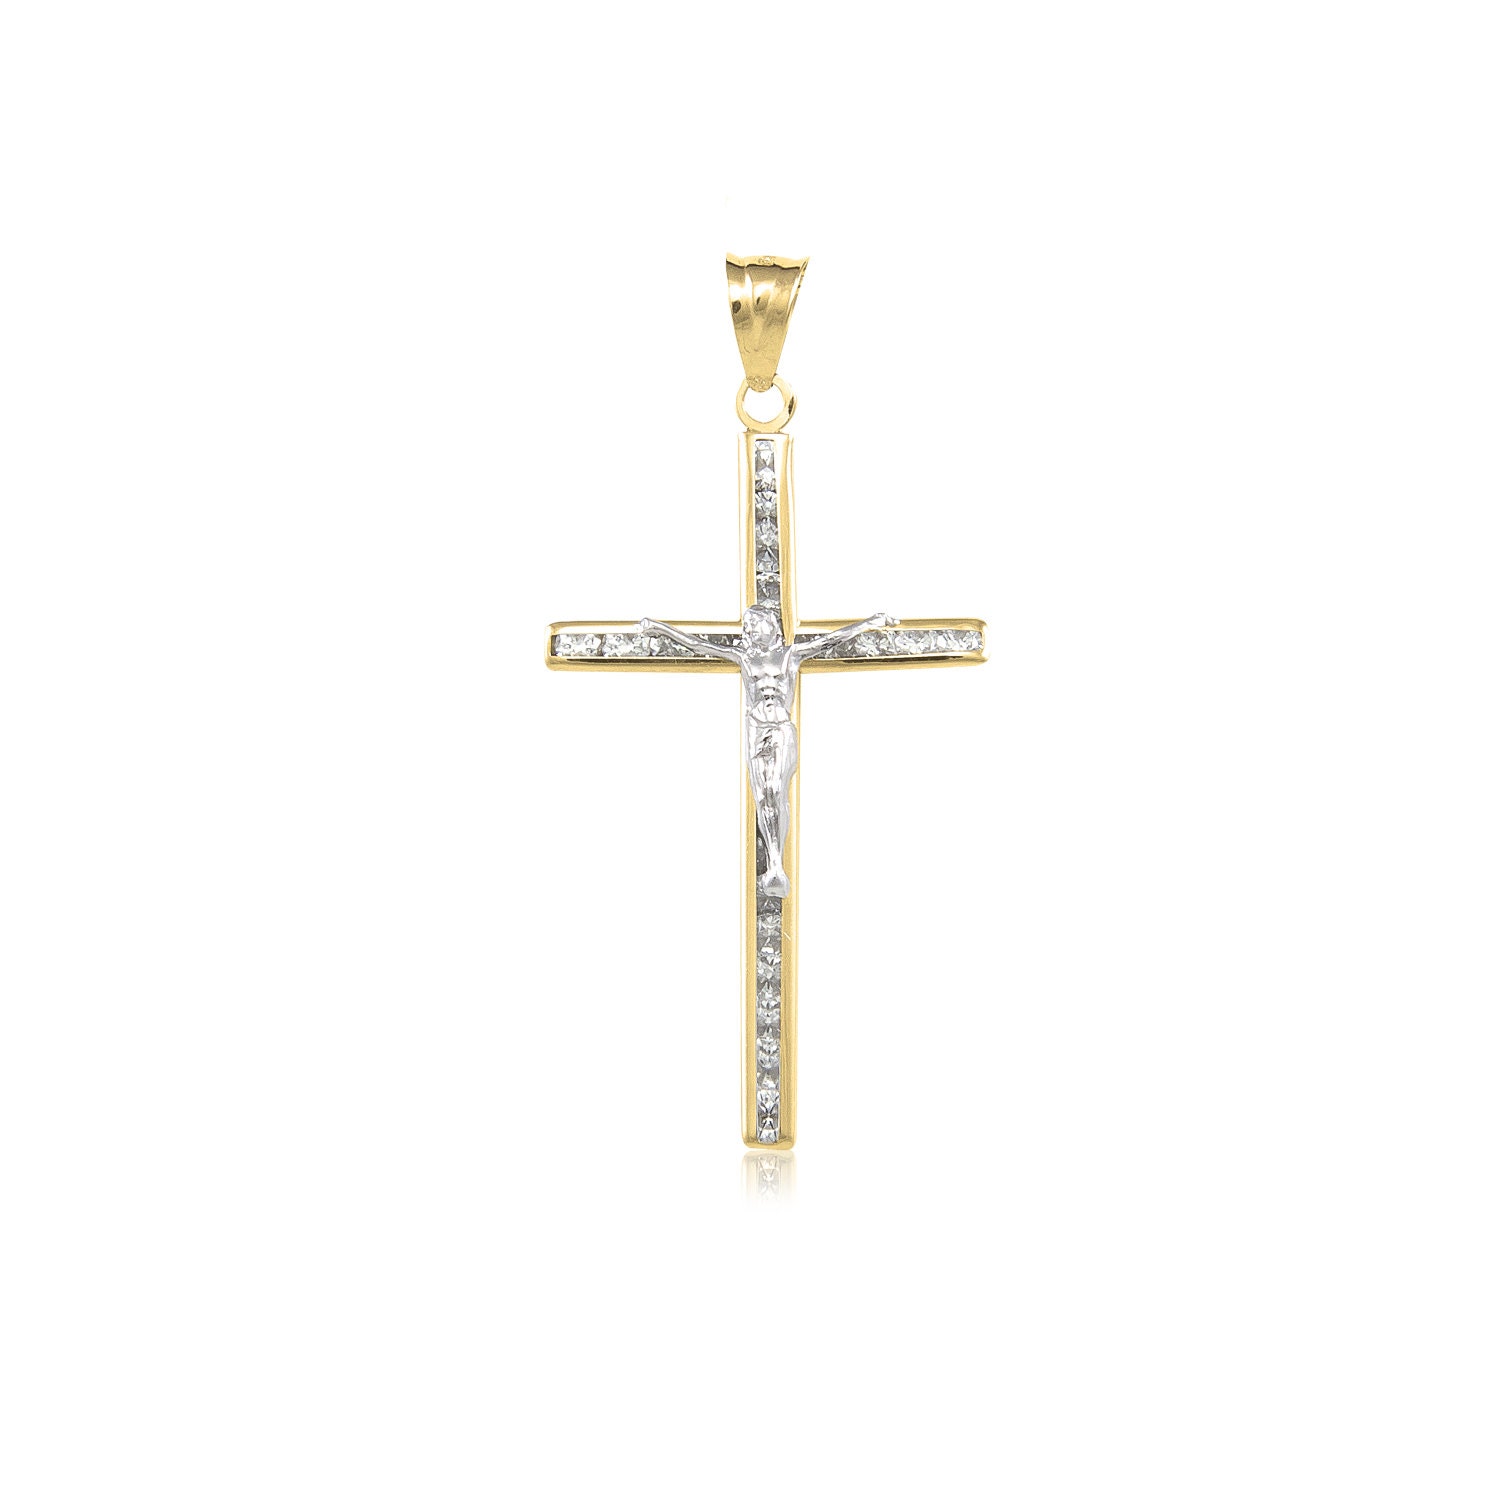 14K Yellow Gold Jesus Crucifix Cross of Caravaca Religious Charm Pendant with 1.2mm Box Chain Necklace 